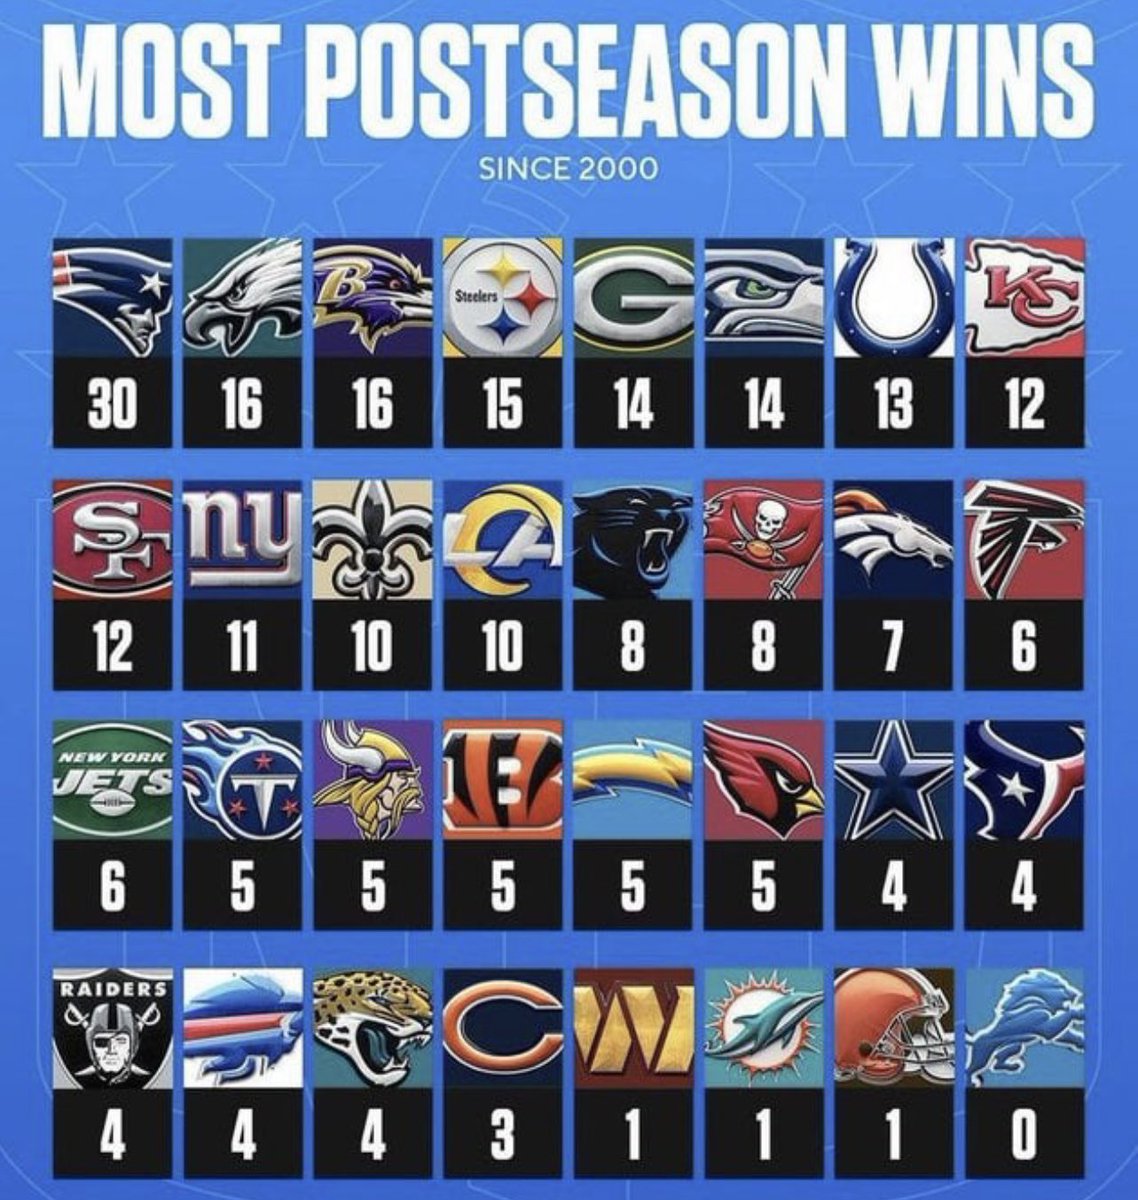 The Ravens are tied for second for the most playoff wins since 2000.